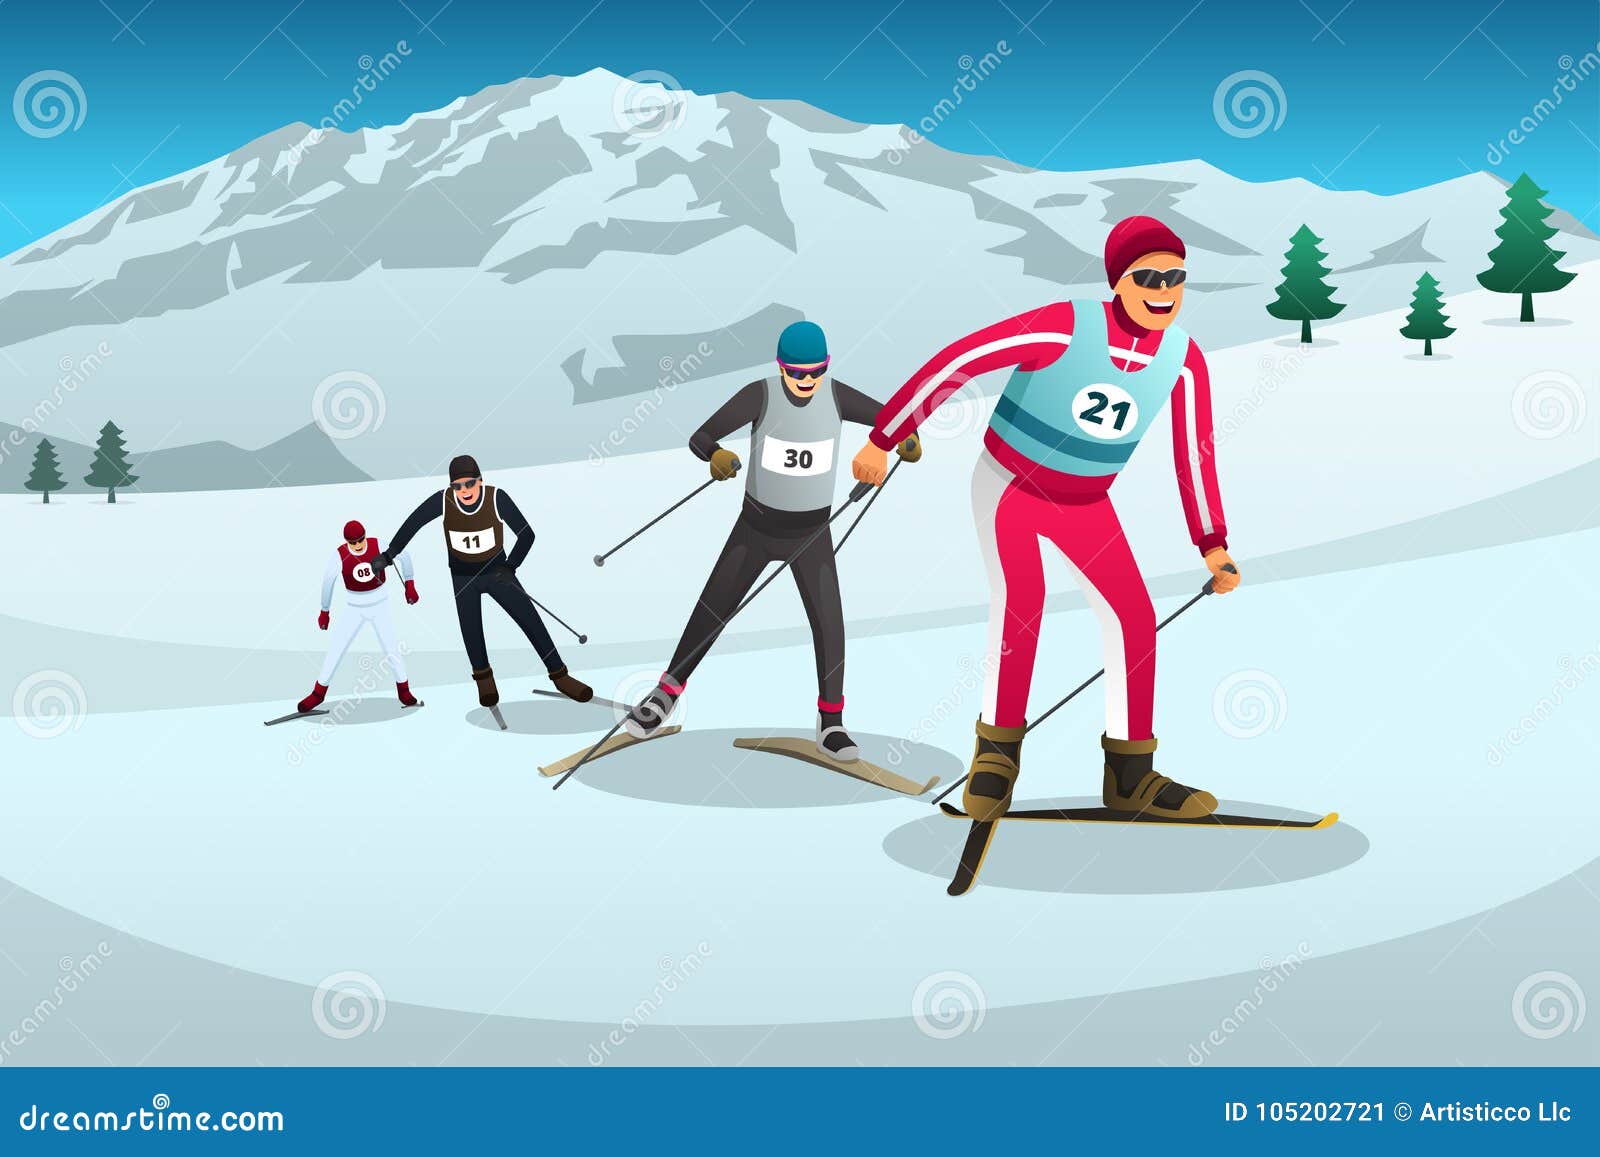 Clipart Cross Country Skiing